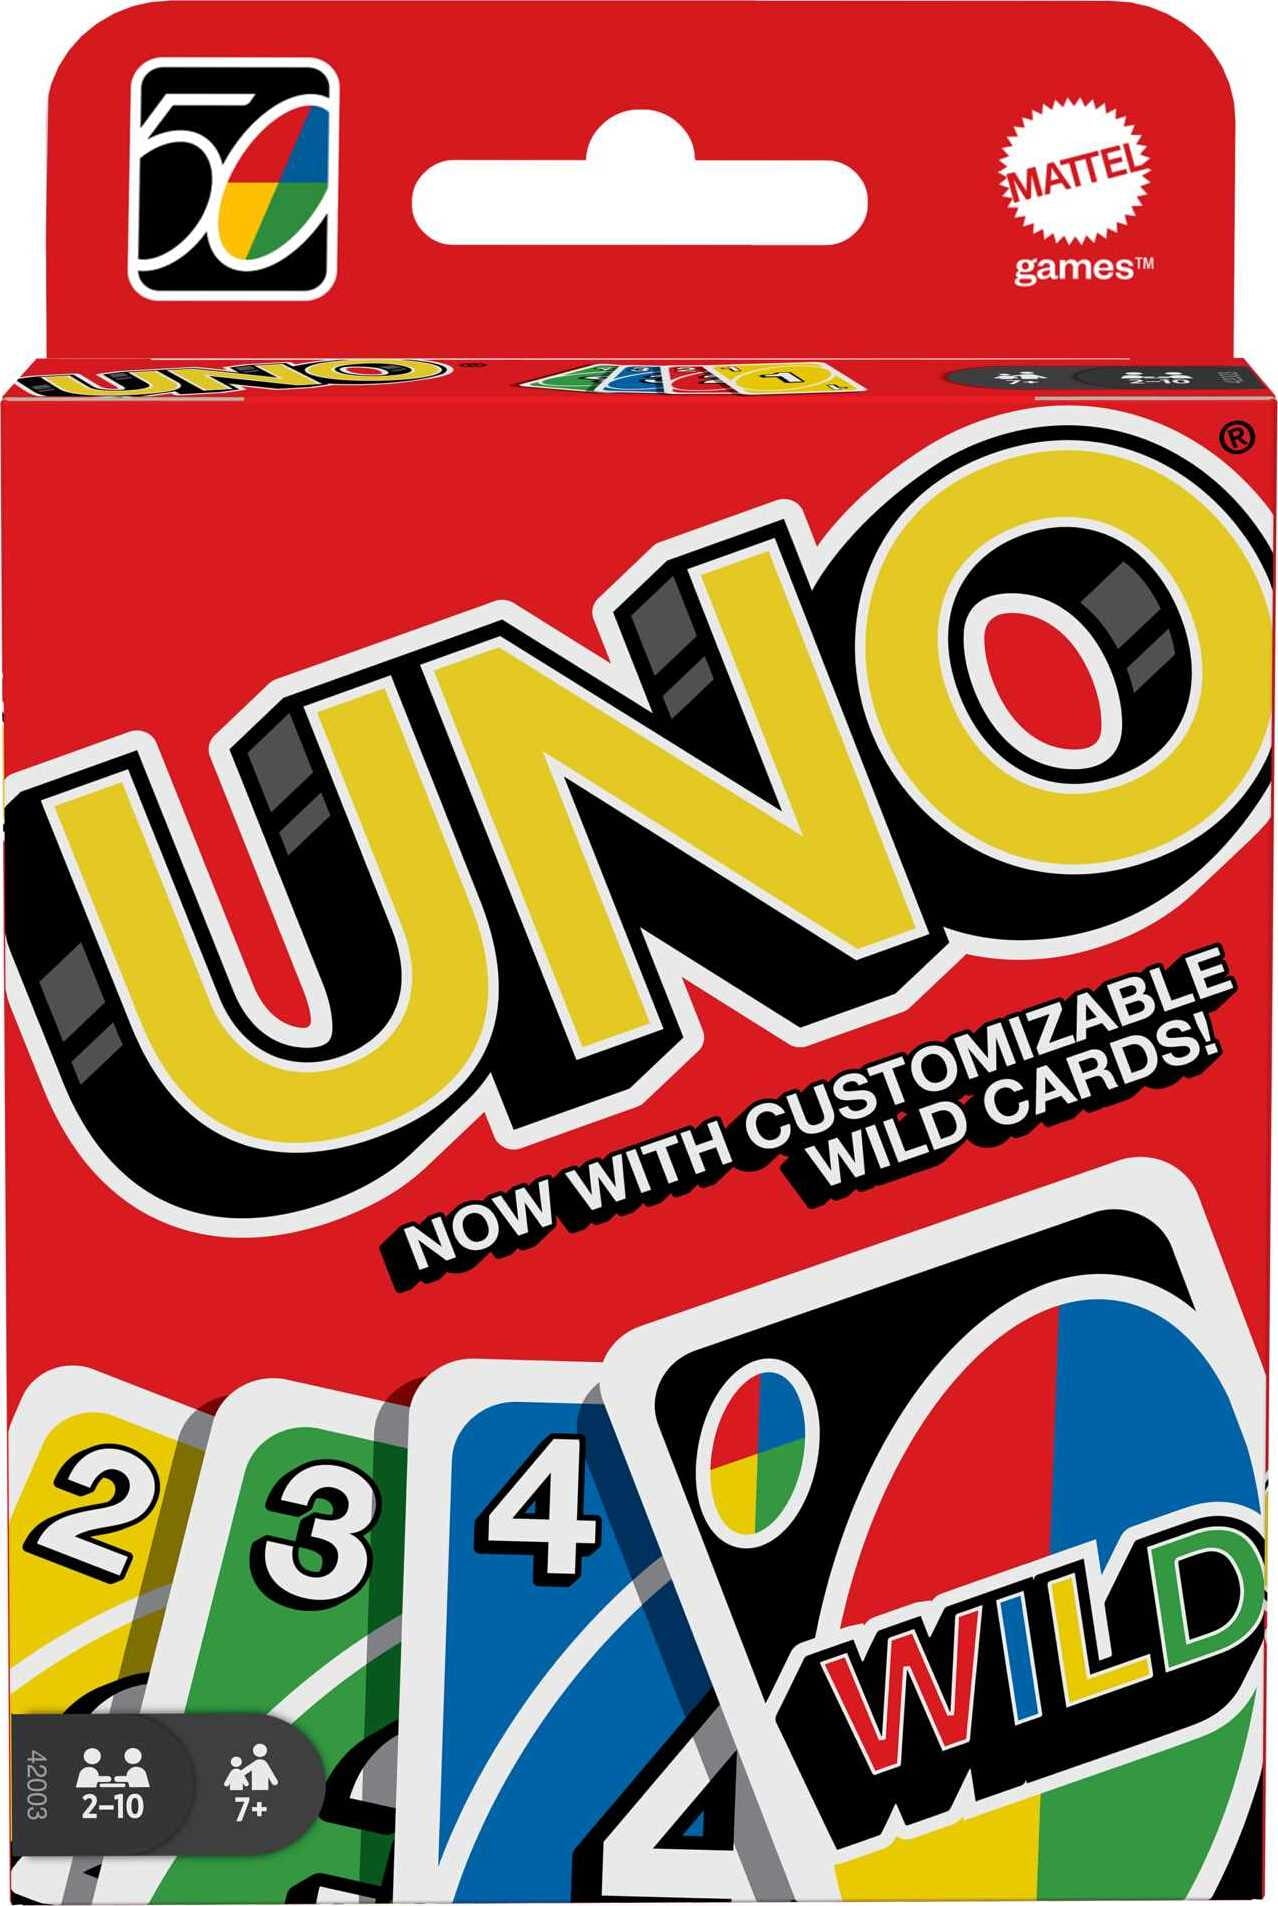 UNO Card Game for 2-10 Kids, Adults & Game Night, Original Game of Matching Colors & Numbers (Easter Basket Stuffer)